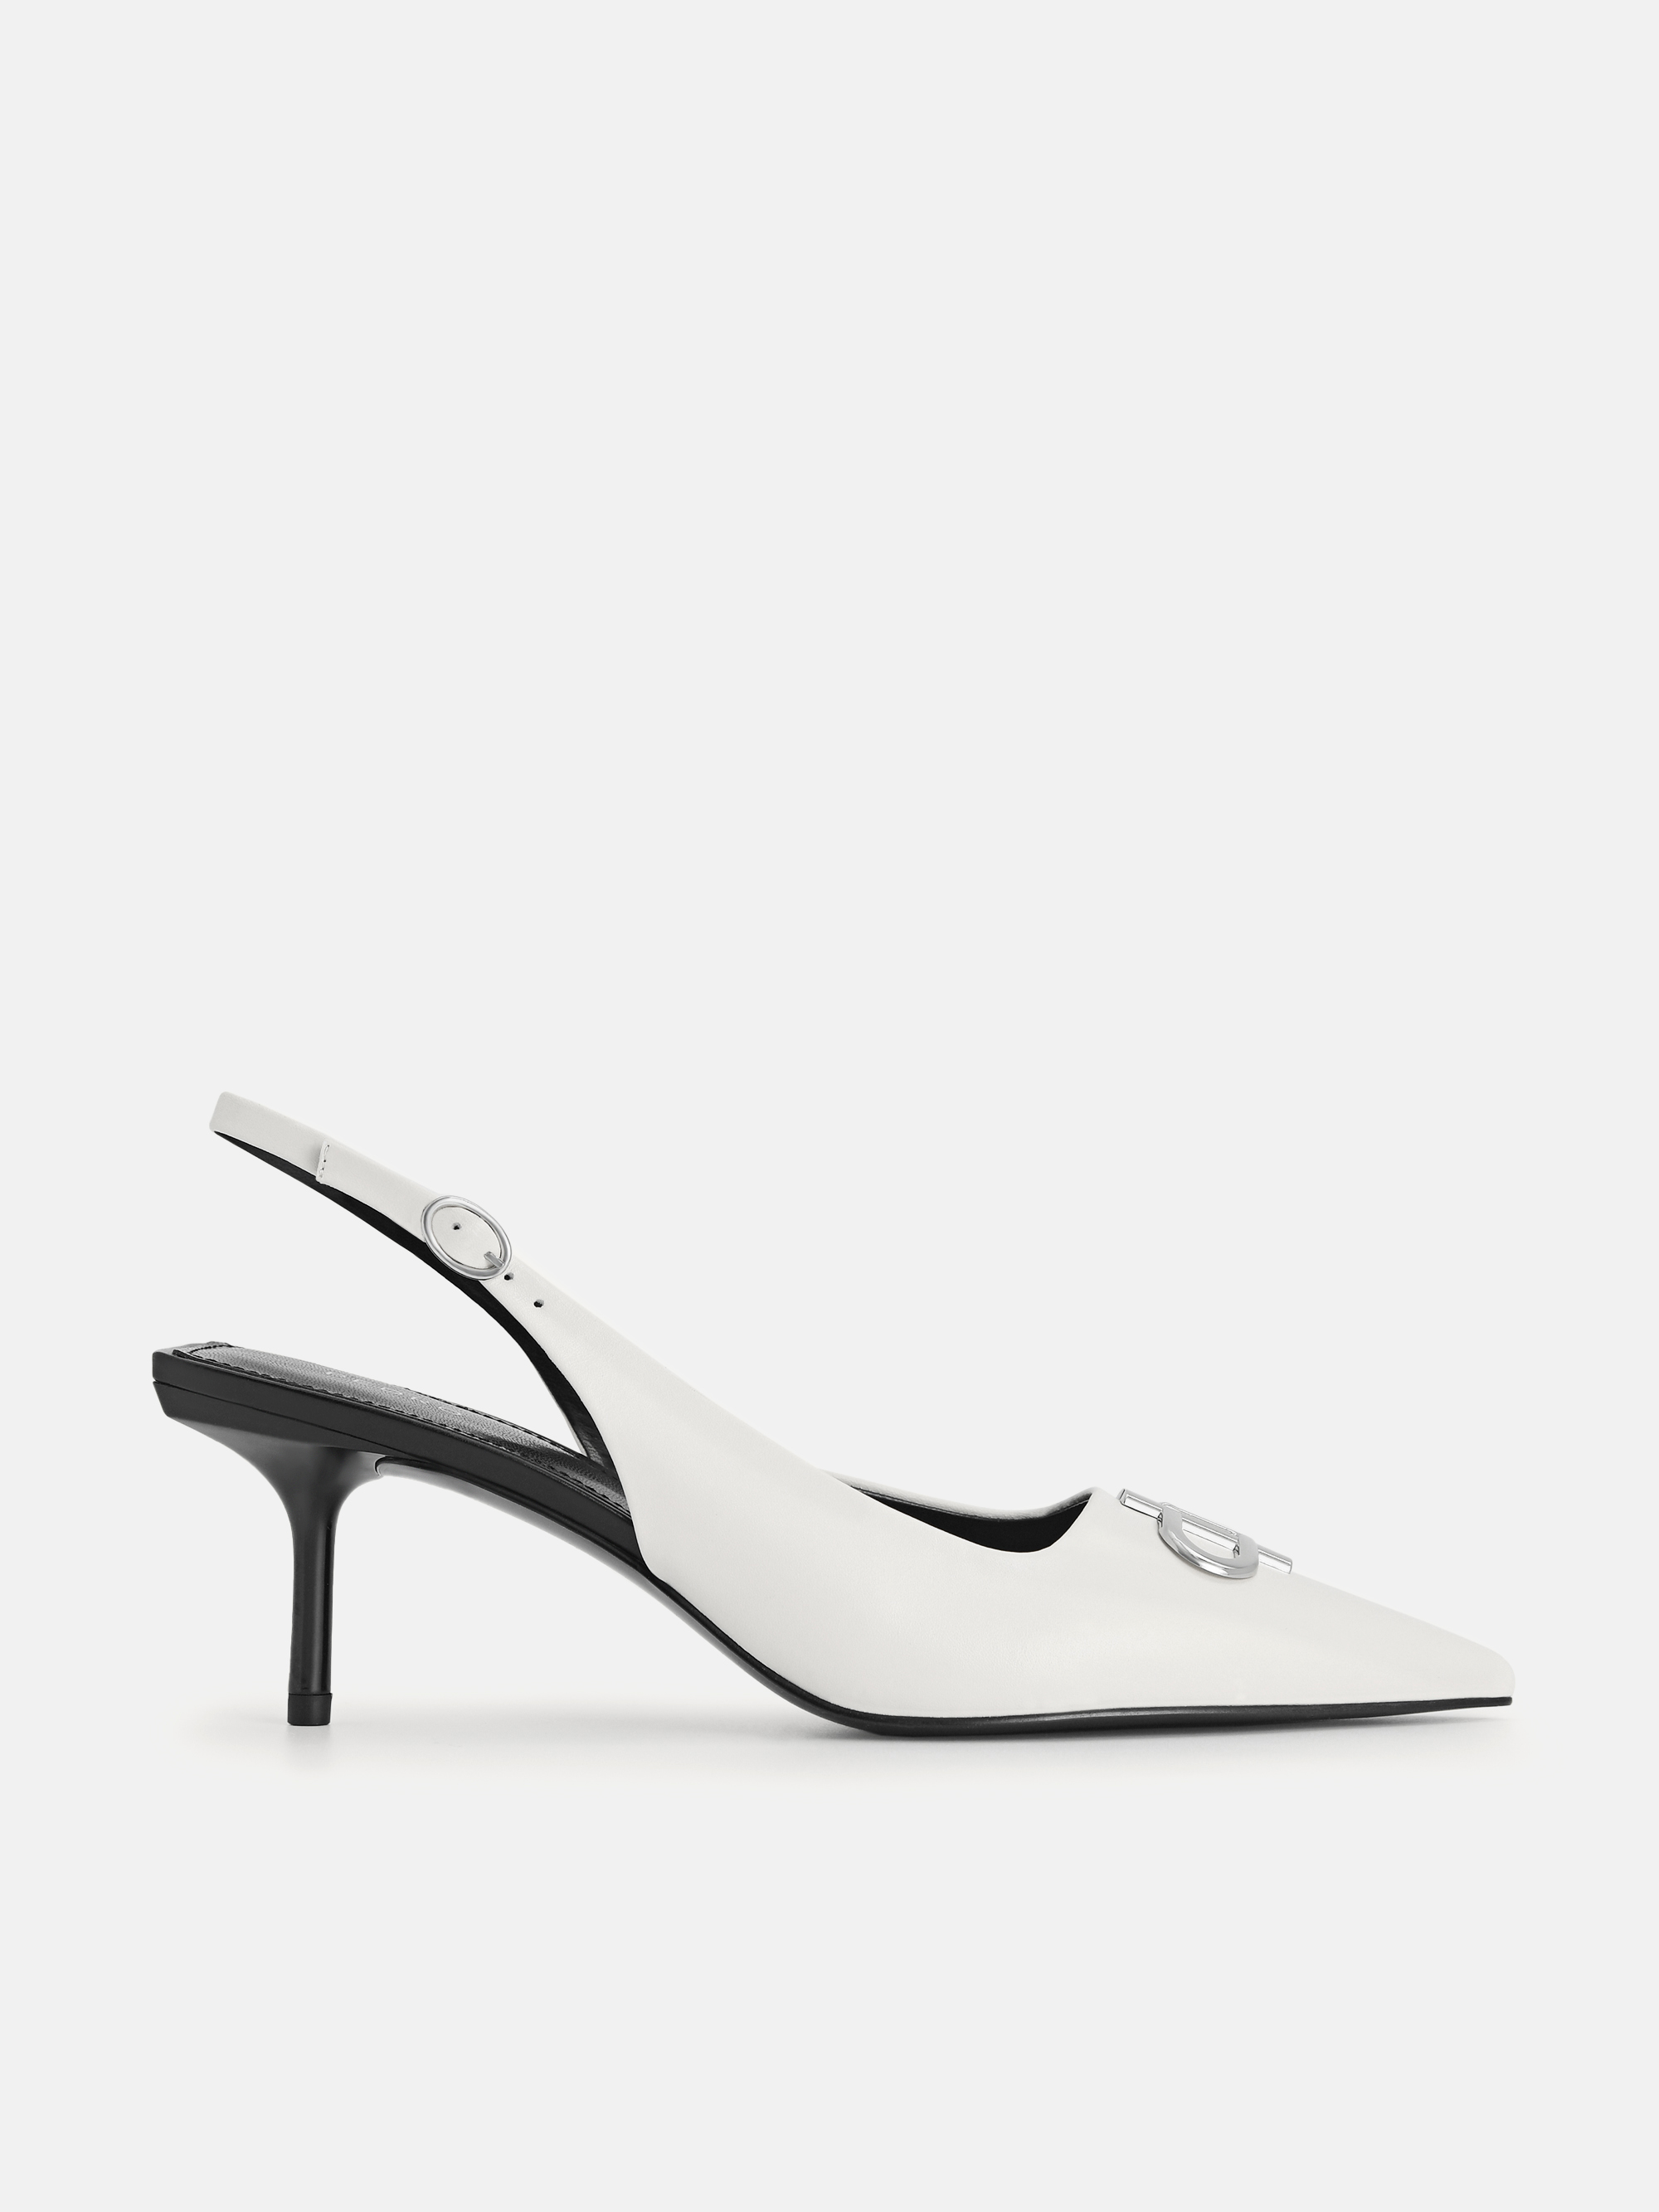 Icon Leather Pointed Slingback Pumps - PEDRO SG